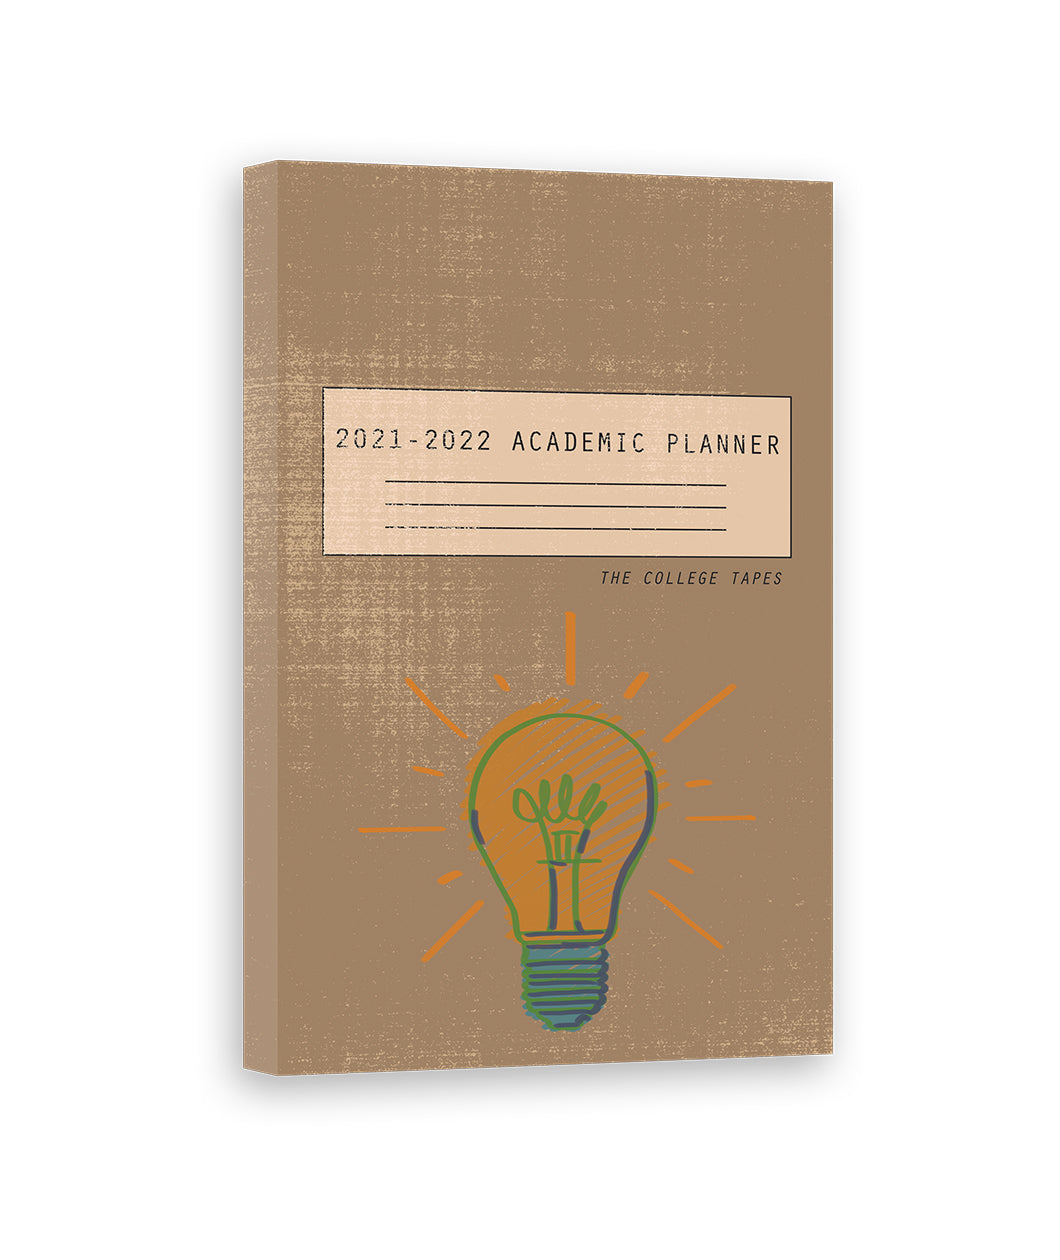 A brown notebook with a light rectangle on the front with the words "2021 - 2022 Academic Planner" with lines below to write on and the words "The College Tapes" written below. An illustration of a light bulb is below. From the Bright Sessions.